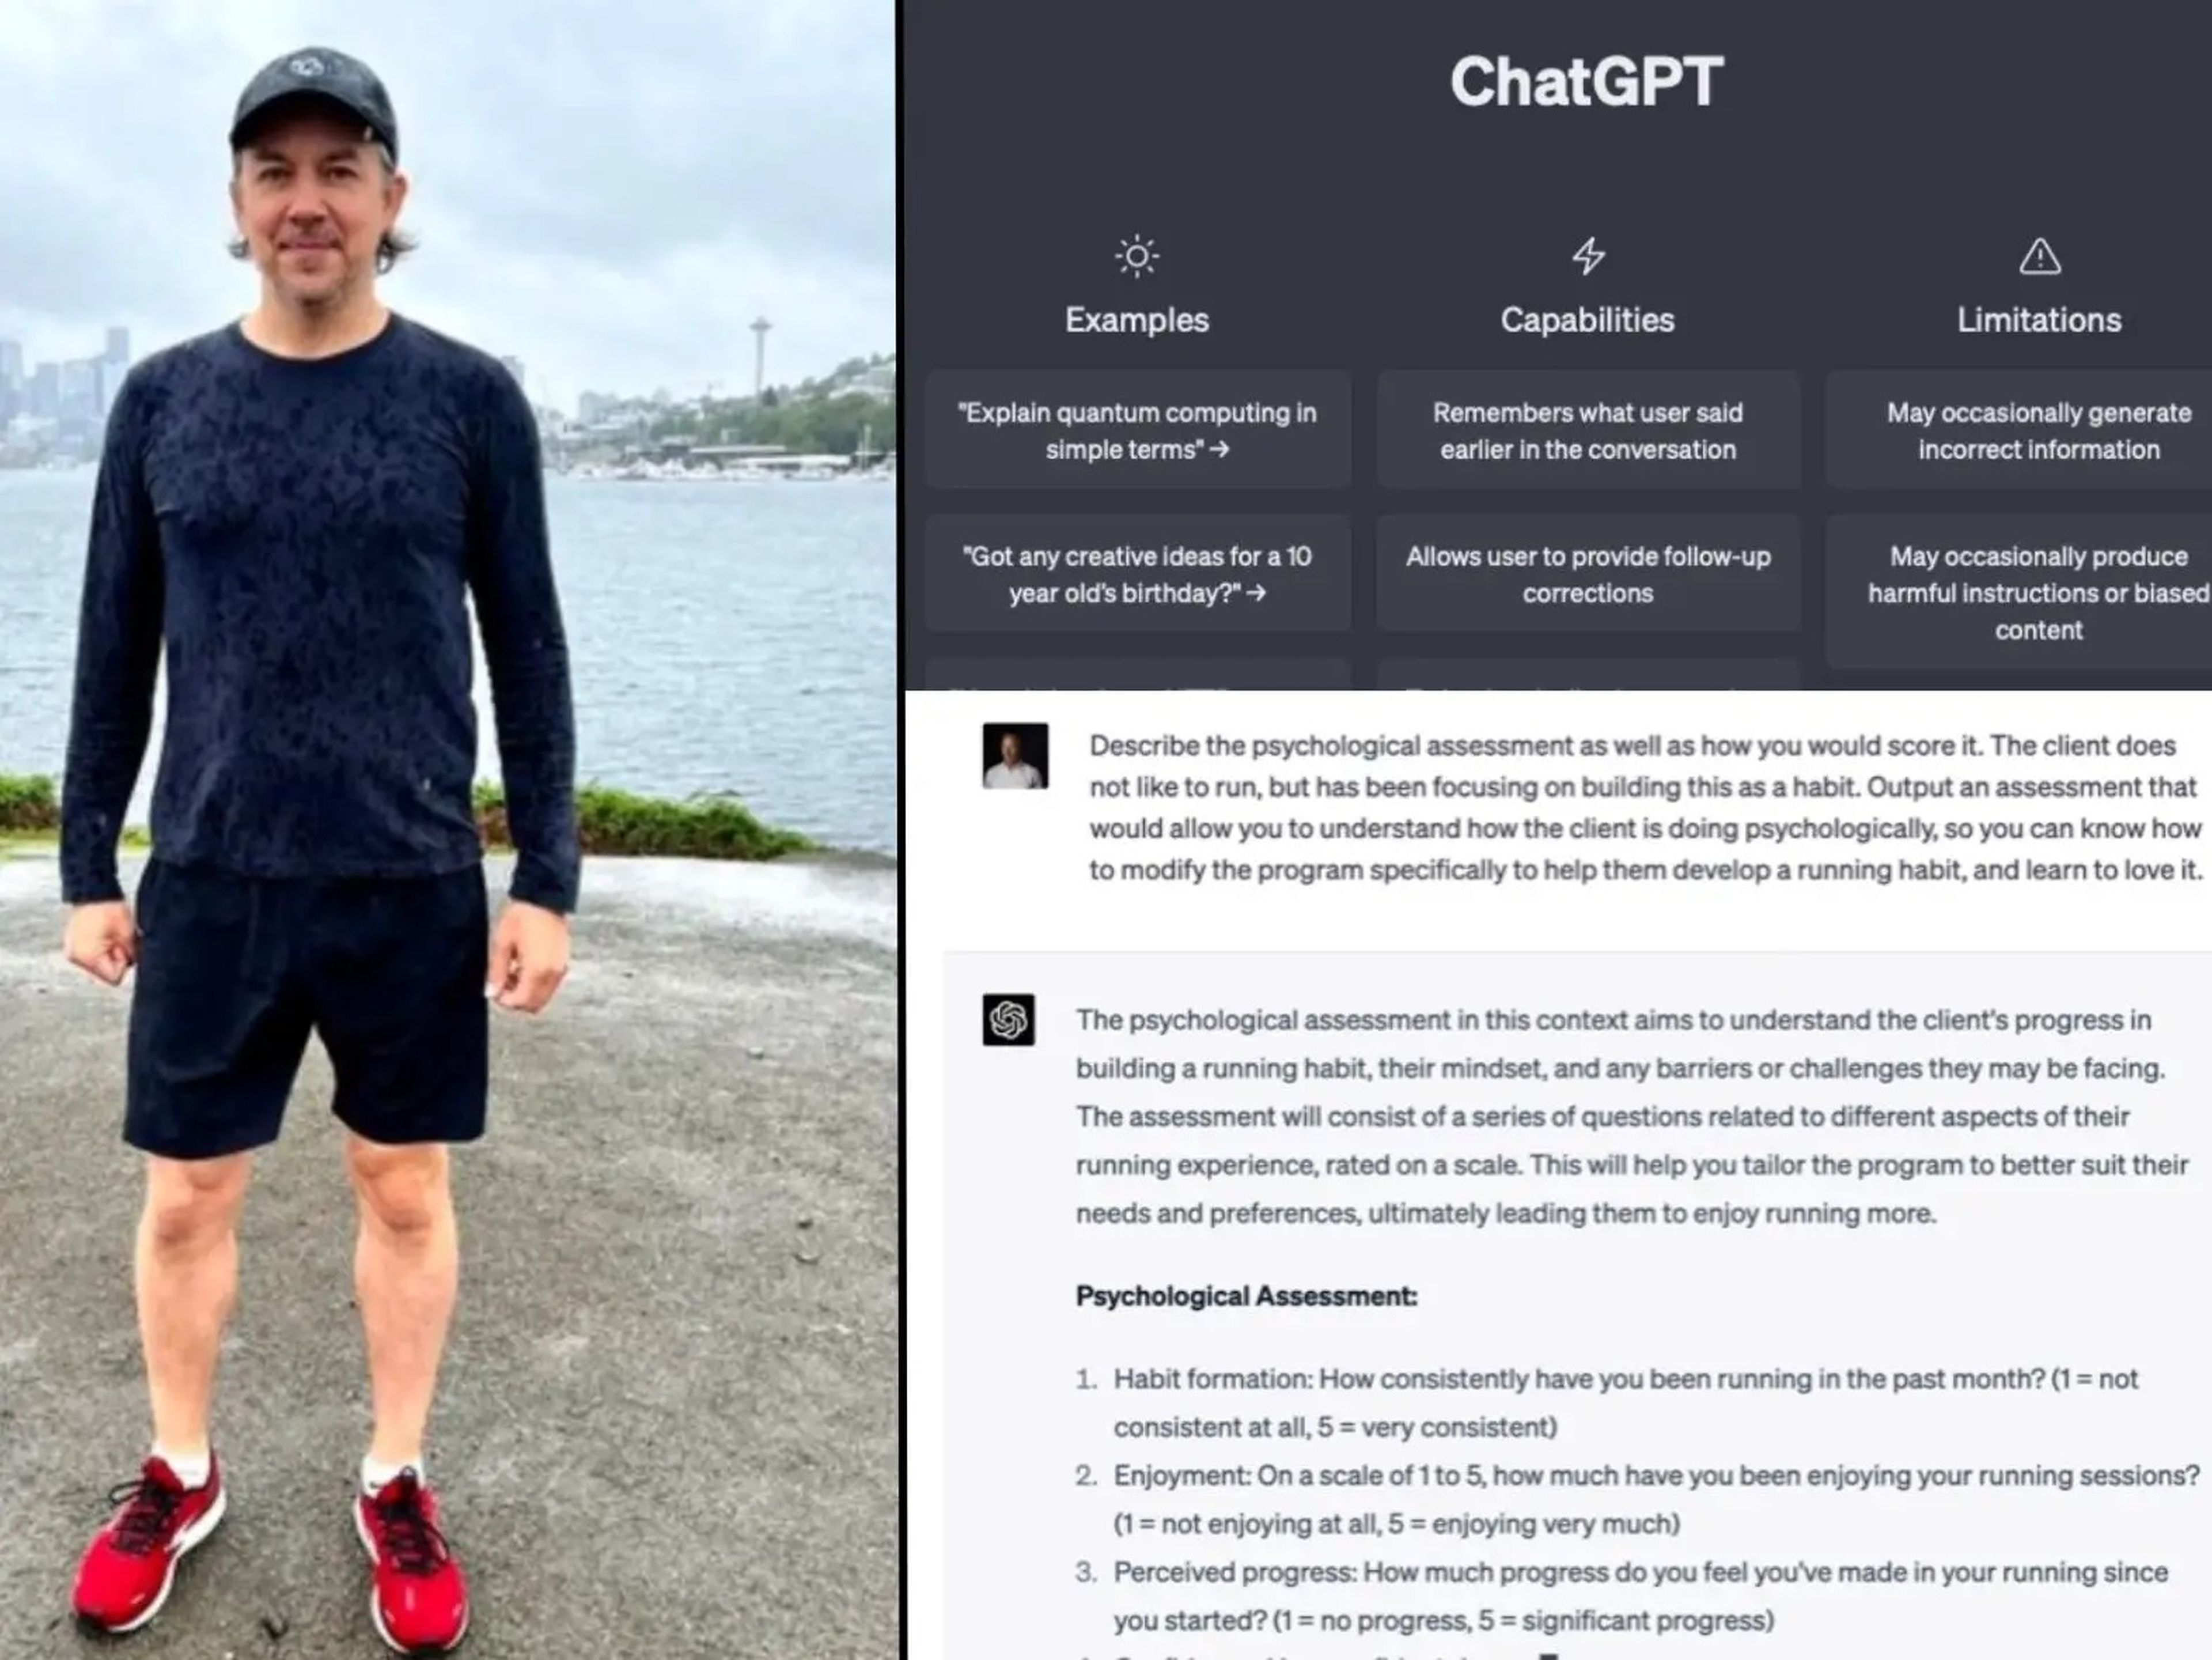 A picture of Greg Mushen in running gear next to screenshots of ChatGPT answering a prompt about evaluating Mushen's fitness performance.